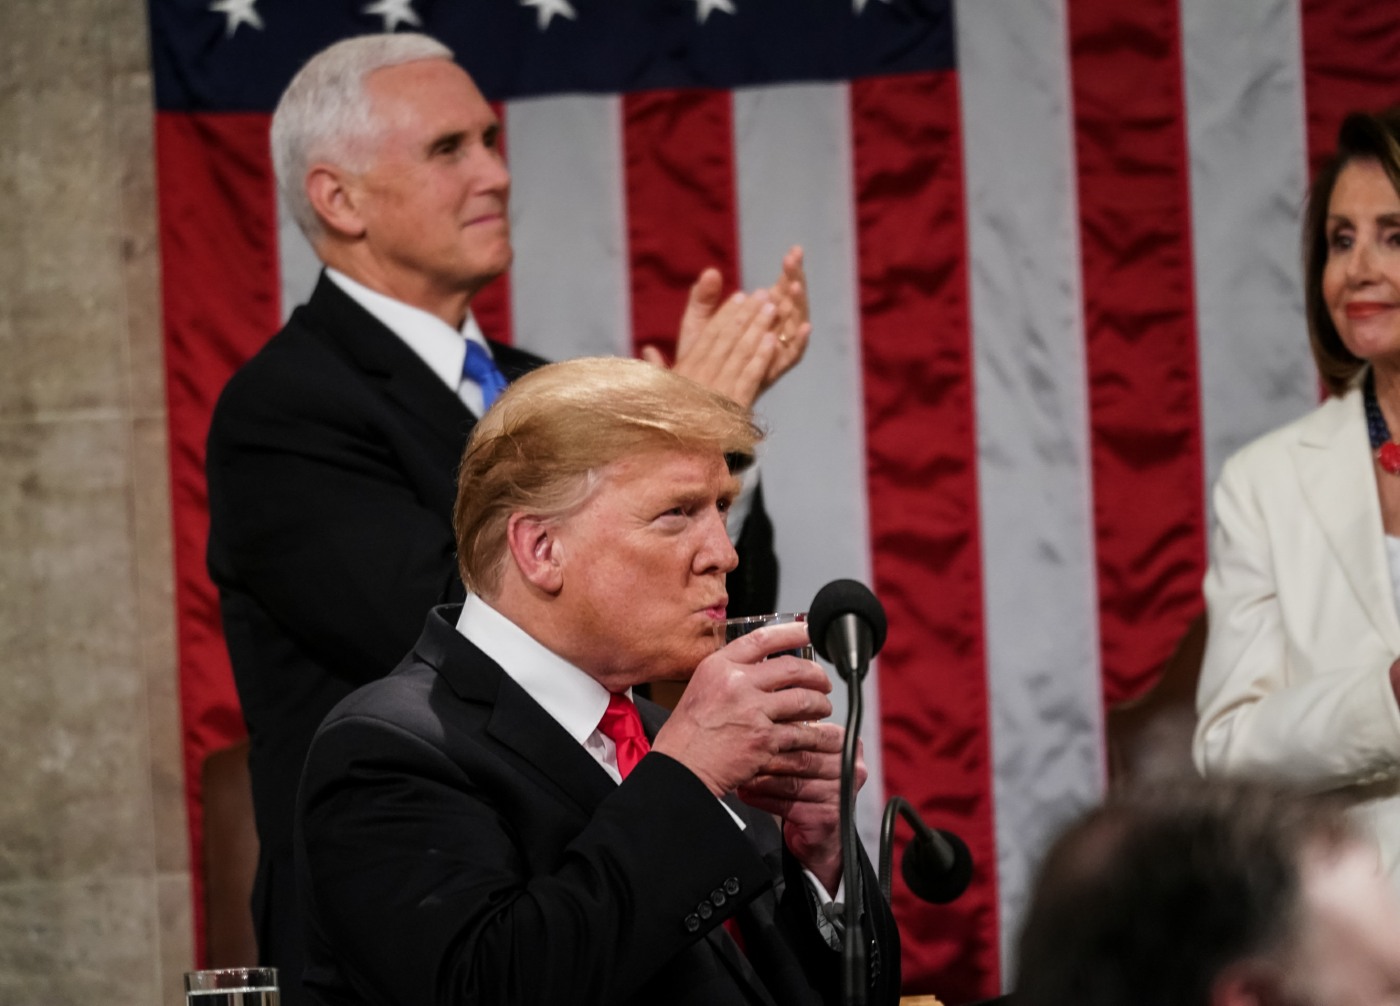 Trump Delivers State of the Union Address